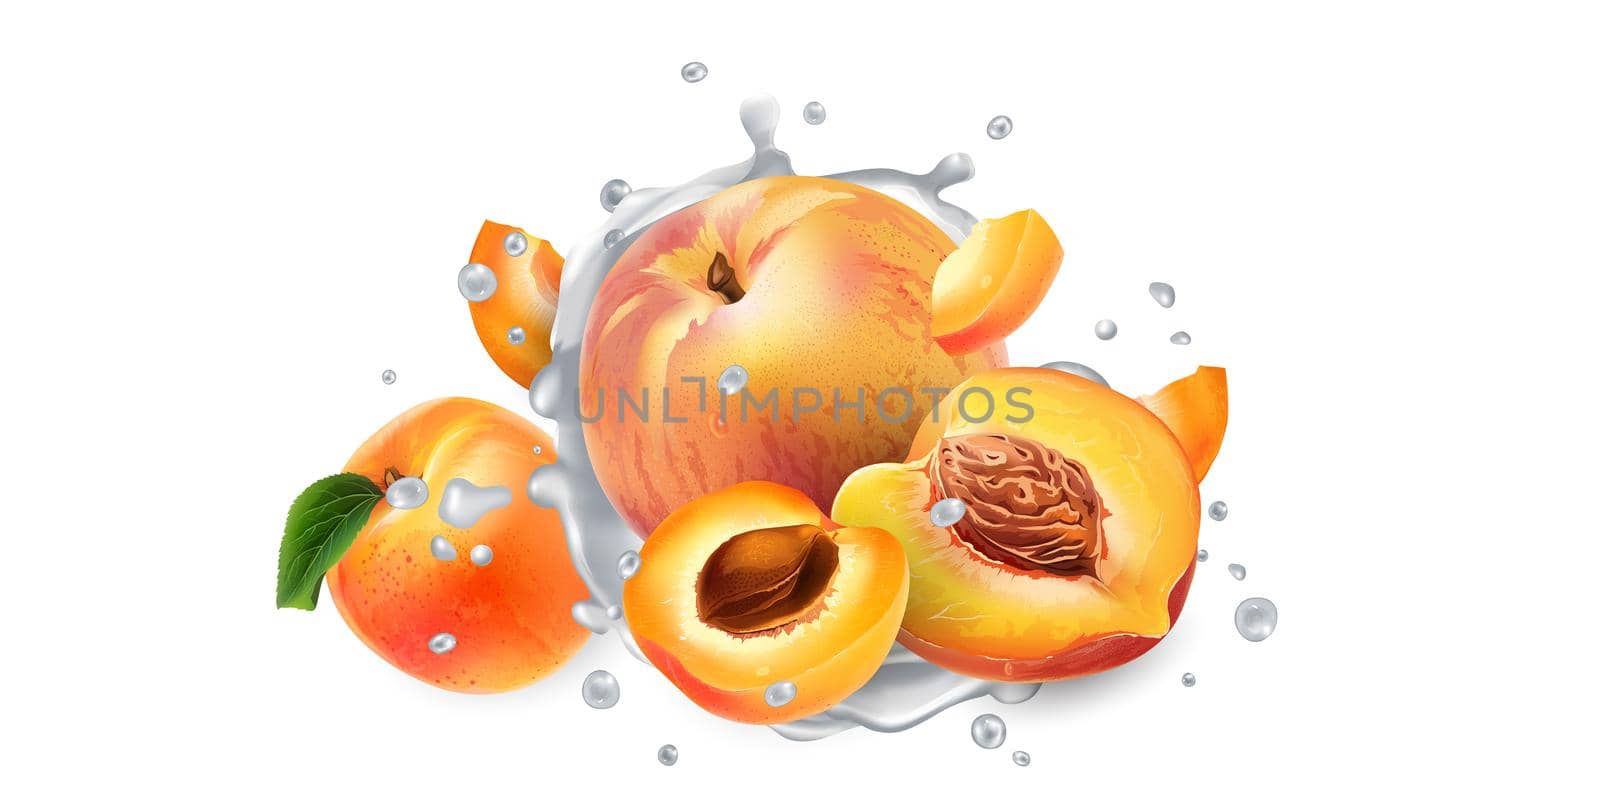 Fresh apricots and peaches in milk splashes on a white background. Realistic style illustration.